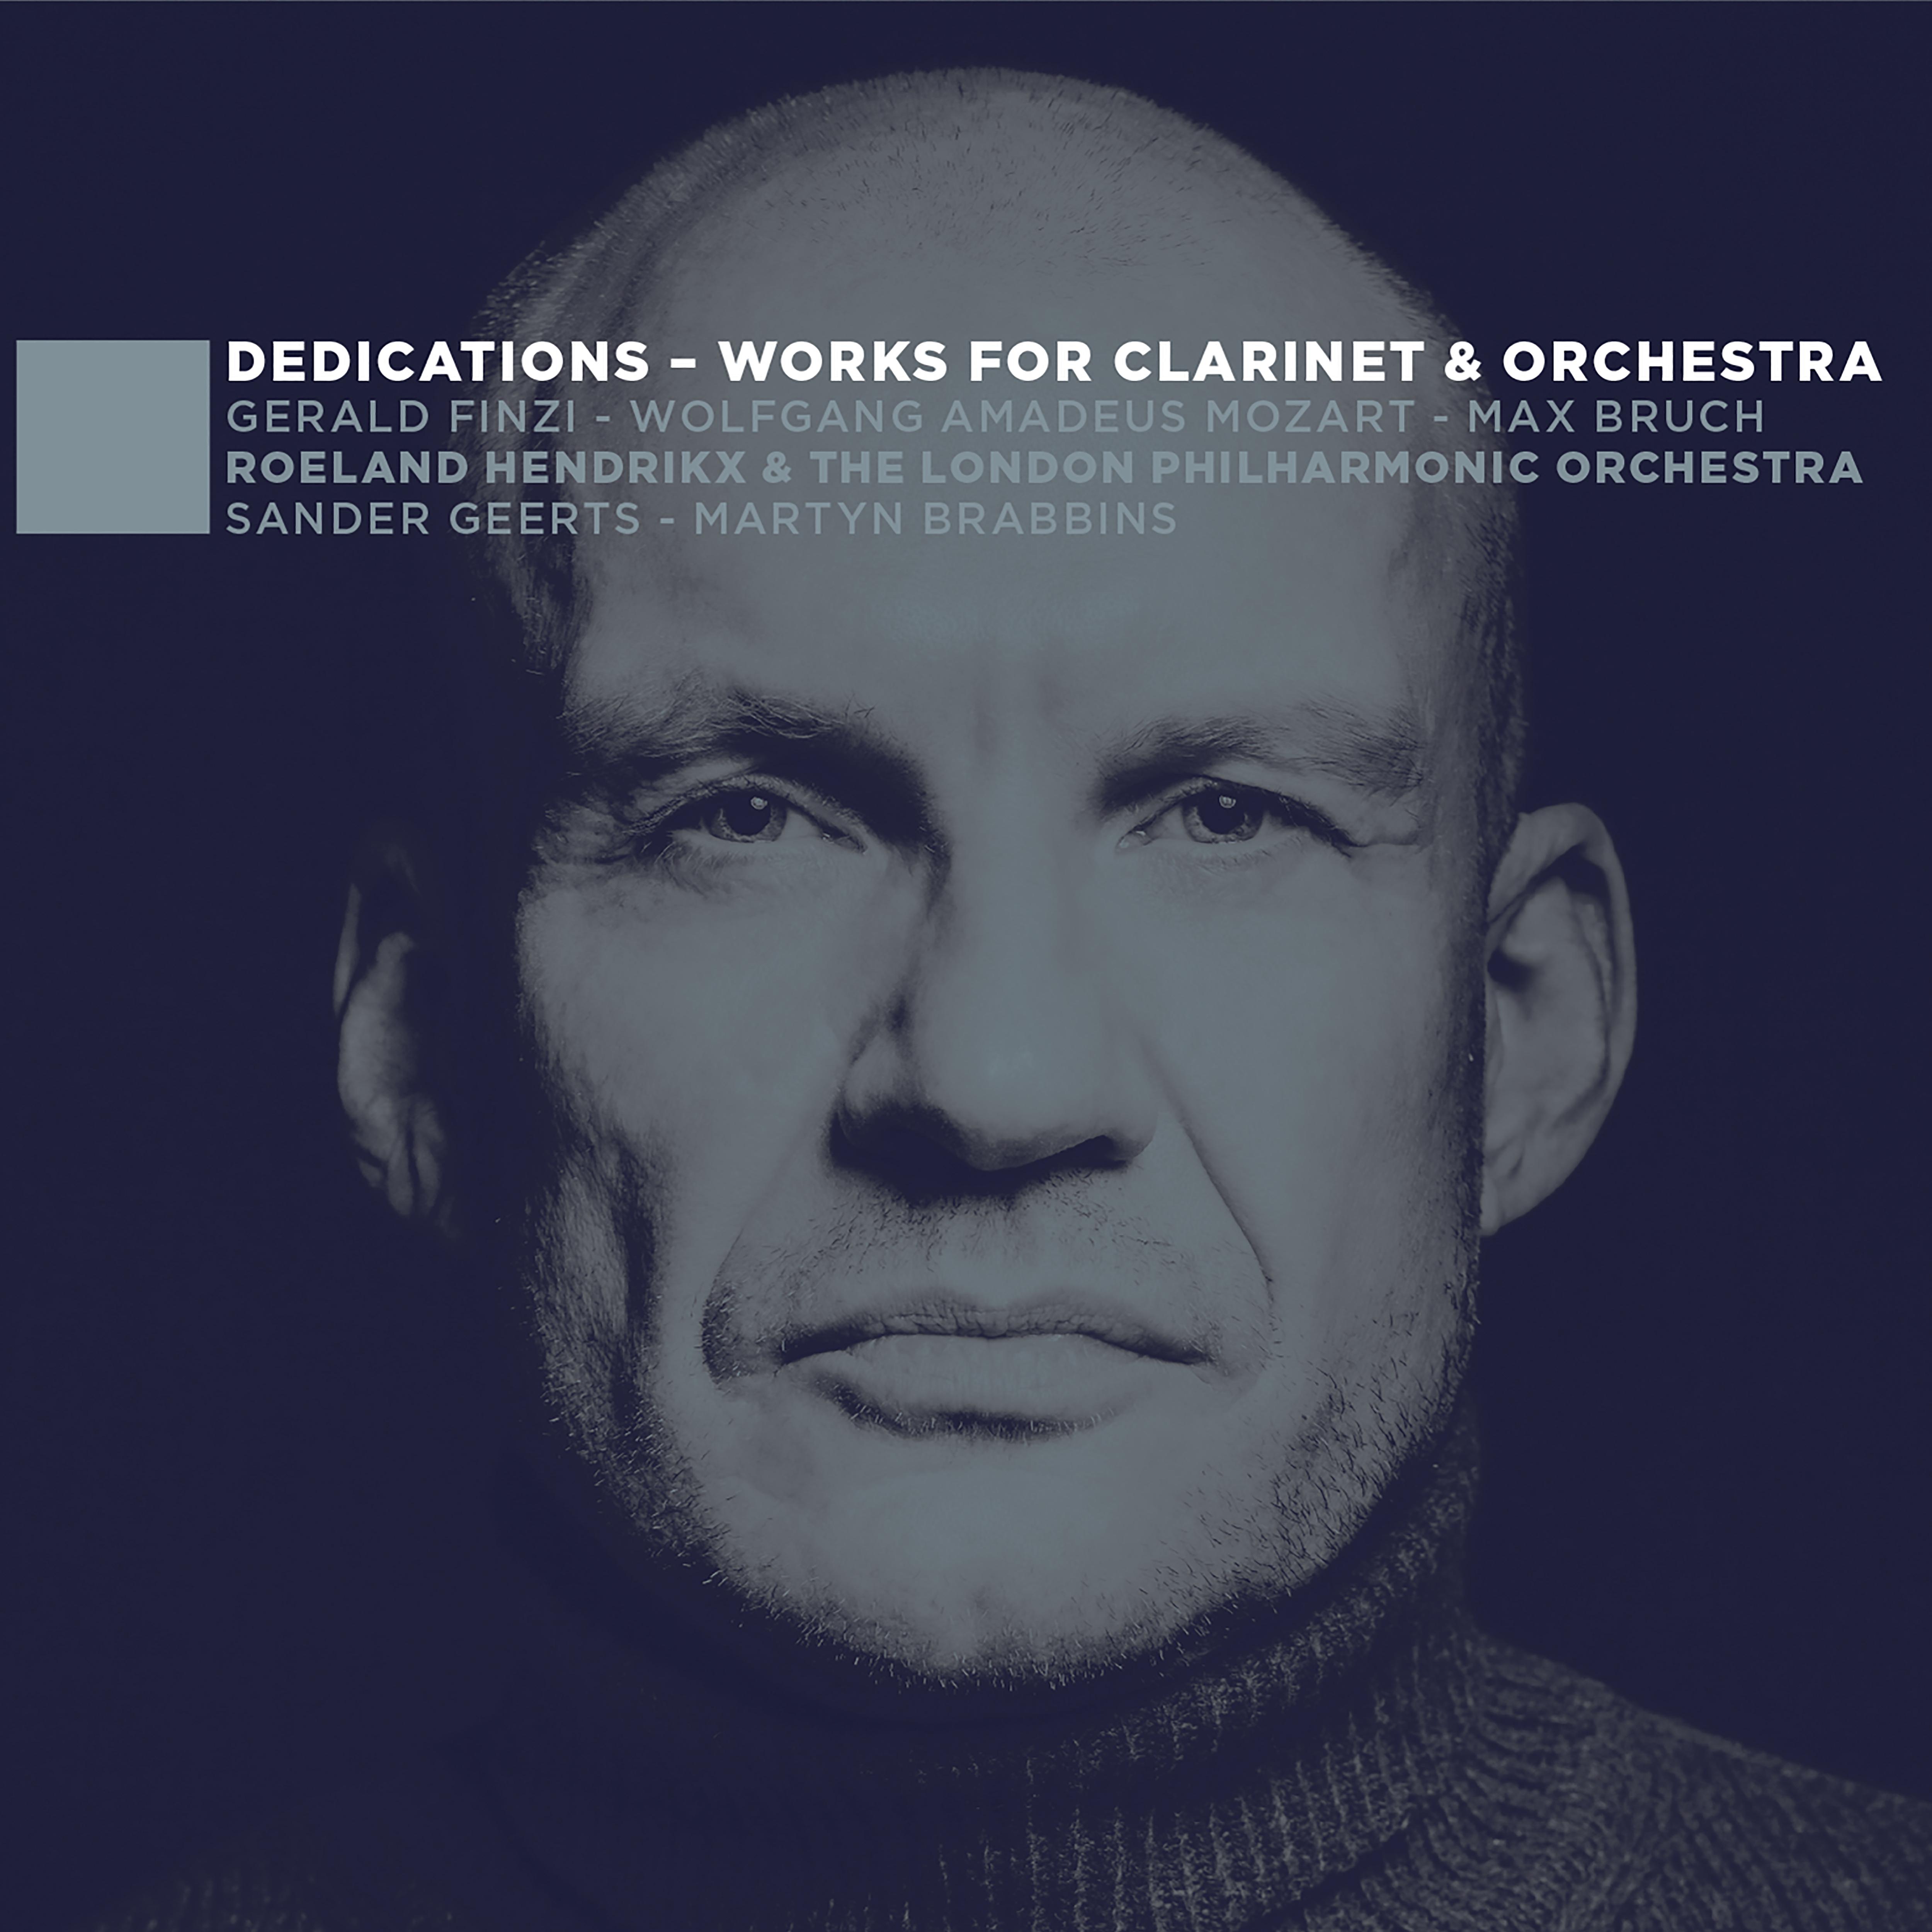 Double Concerto for Clarinet and Viola with Orchestra, Op. 88: I. Andante con moto